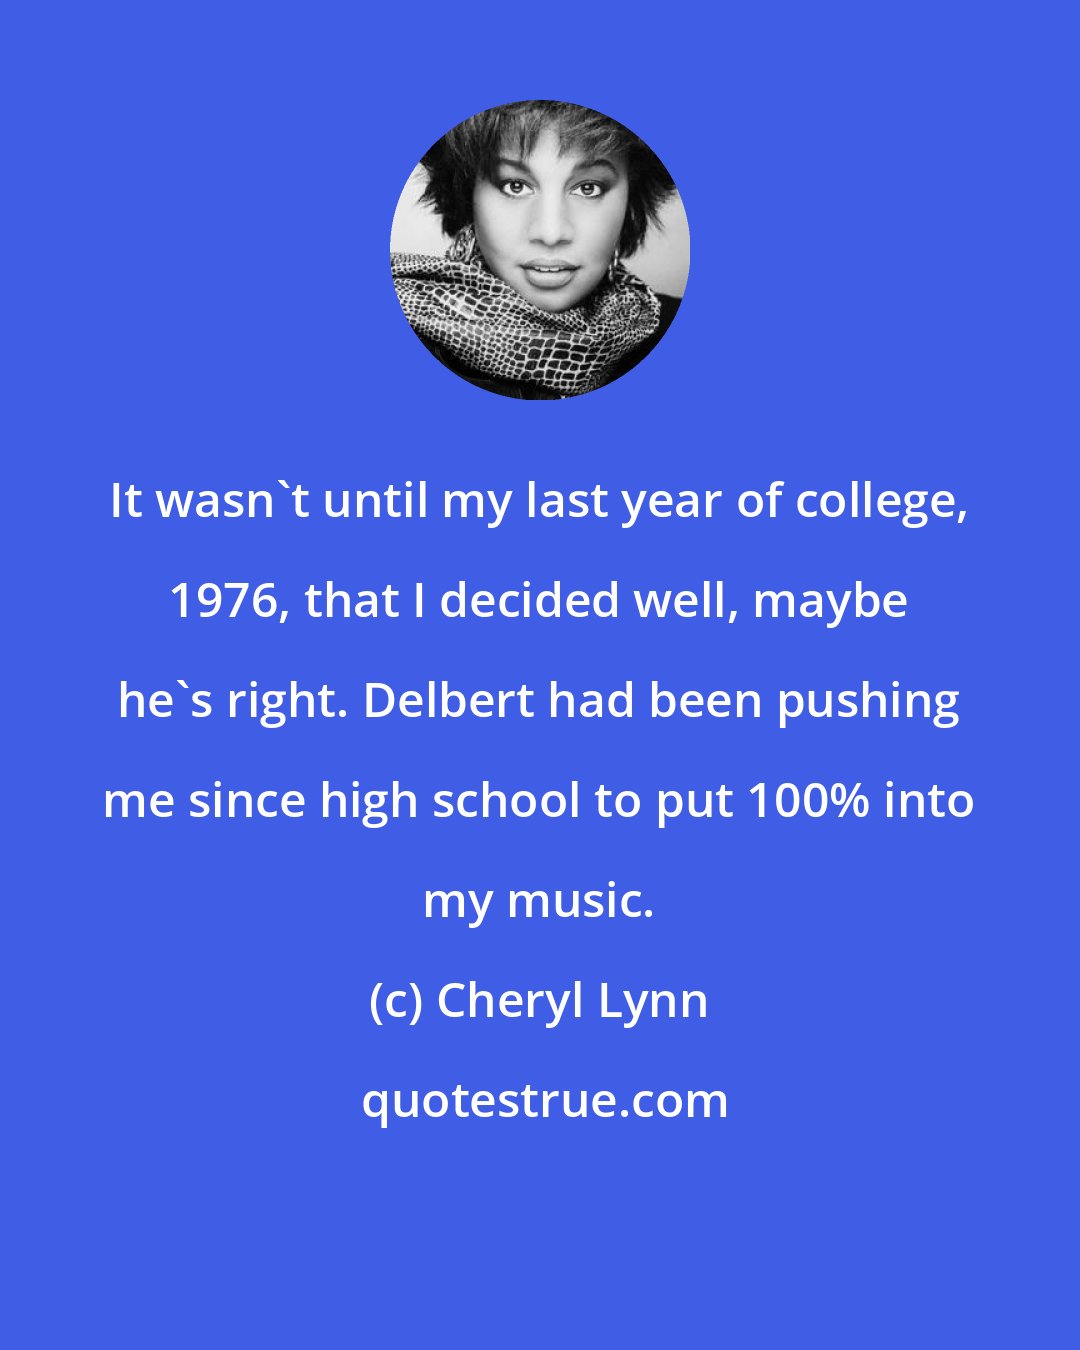 Cheryl Lynn: It wasn't until my last year of college, 1976, that I decided well, maybe he's right. Delbert had been pushing me since high school to put 100% into my music.